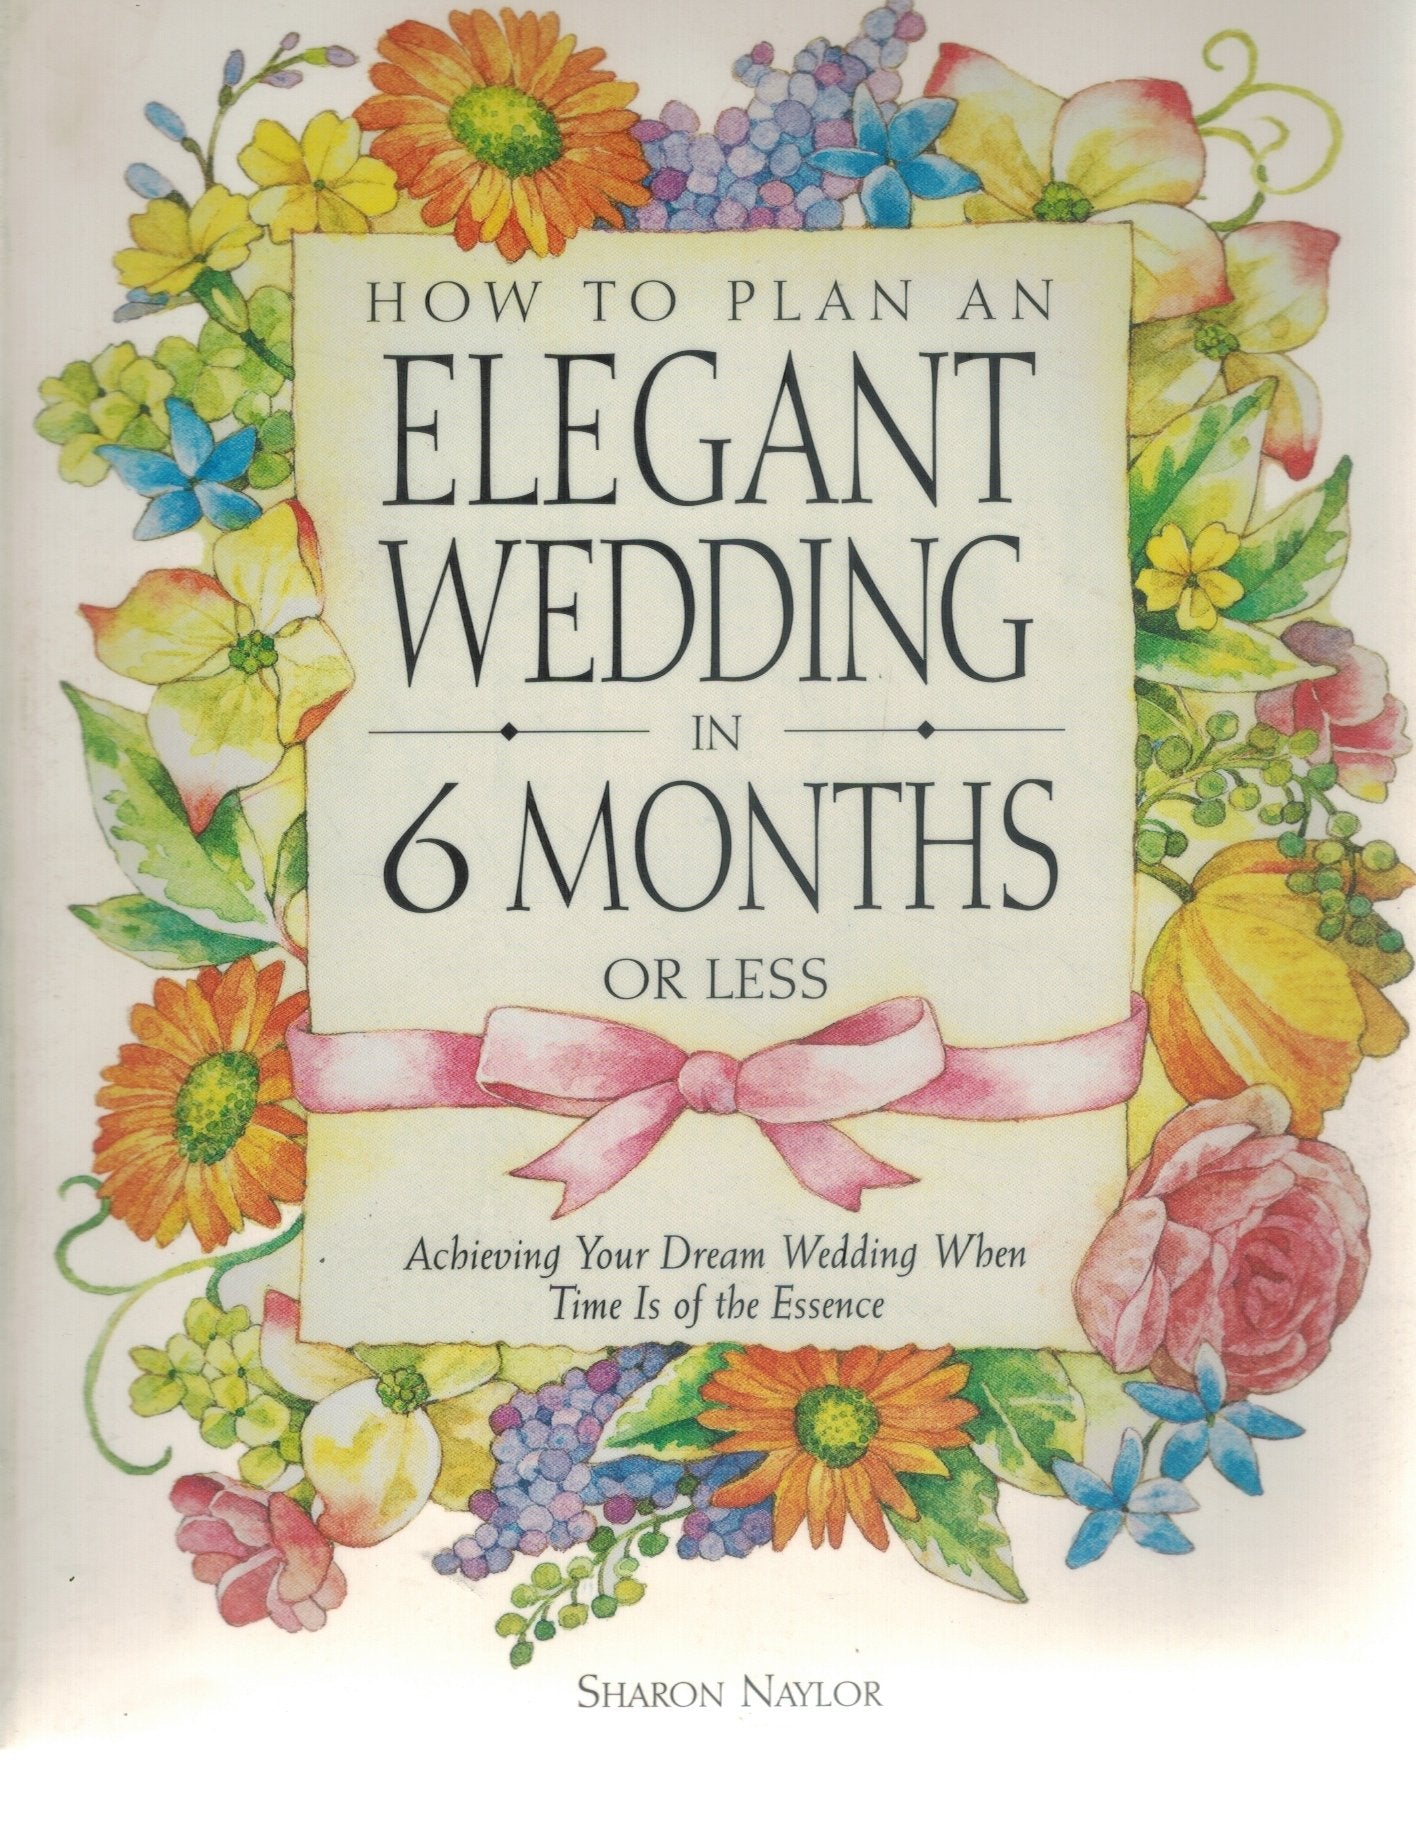 HOW TO PLAN AN ELEGANT WEDDING IN 6 MONTHS OR LESS  Achieving Your Dream  Wedding When Time Is of the Essence  by Naylor, Sharon